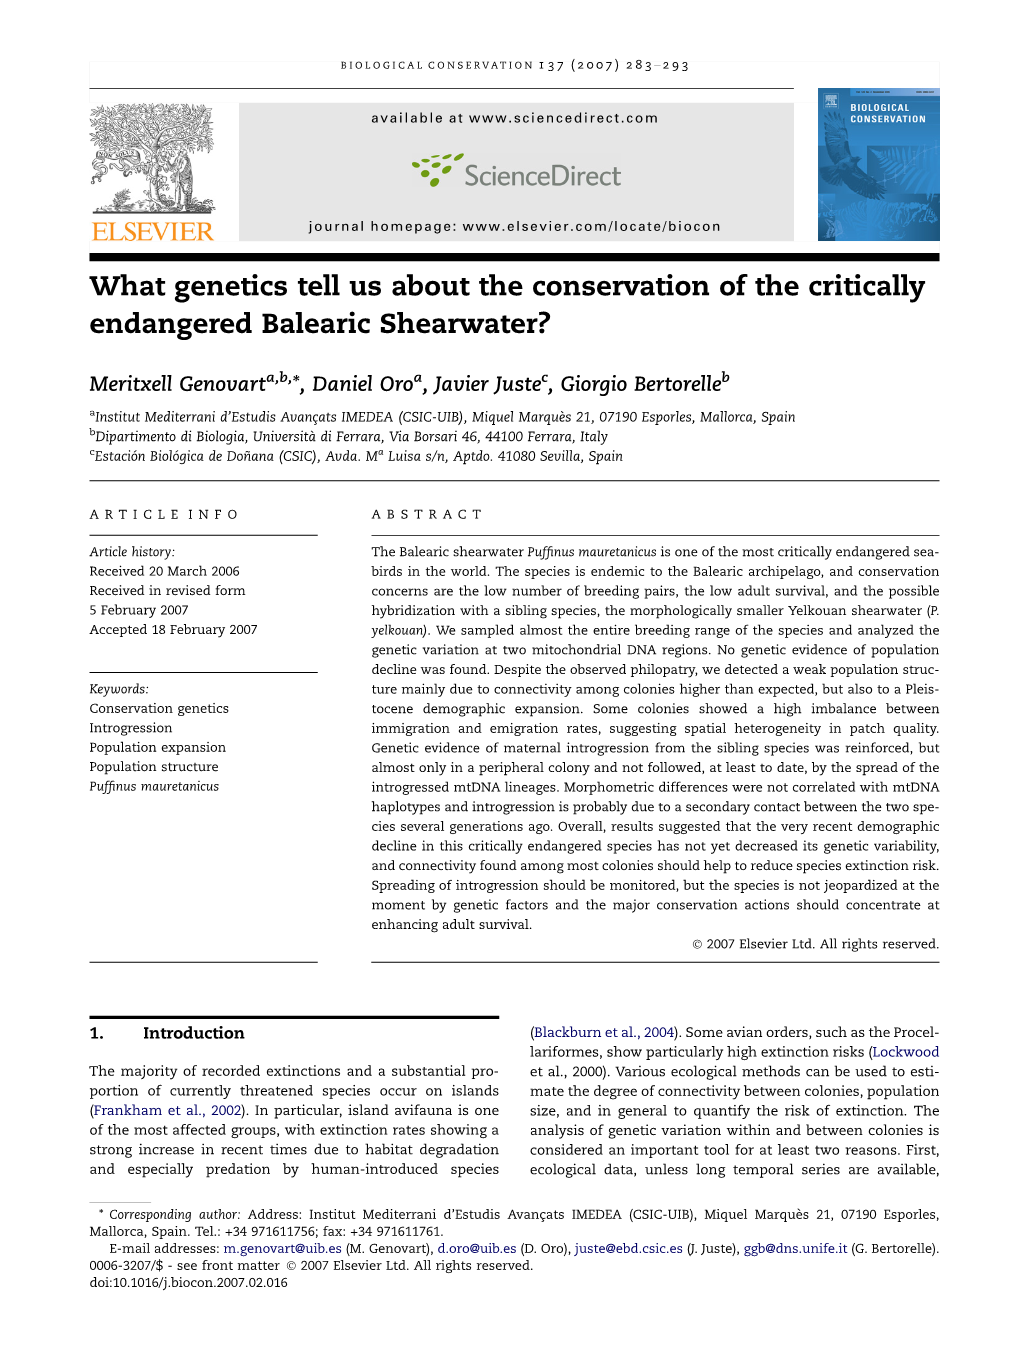 What Genetics Tell Us About the Conservation of the Critically Endangered Balearic Shearwater?